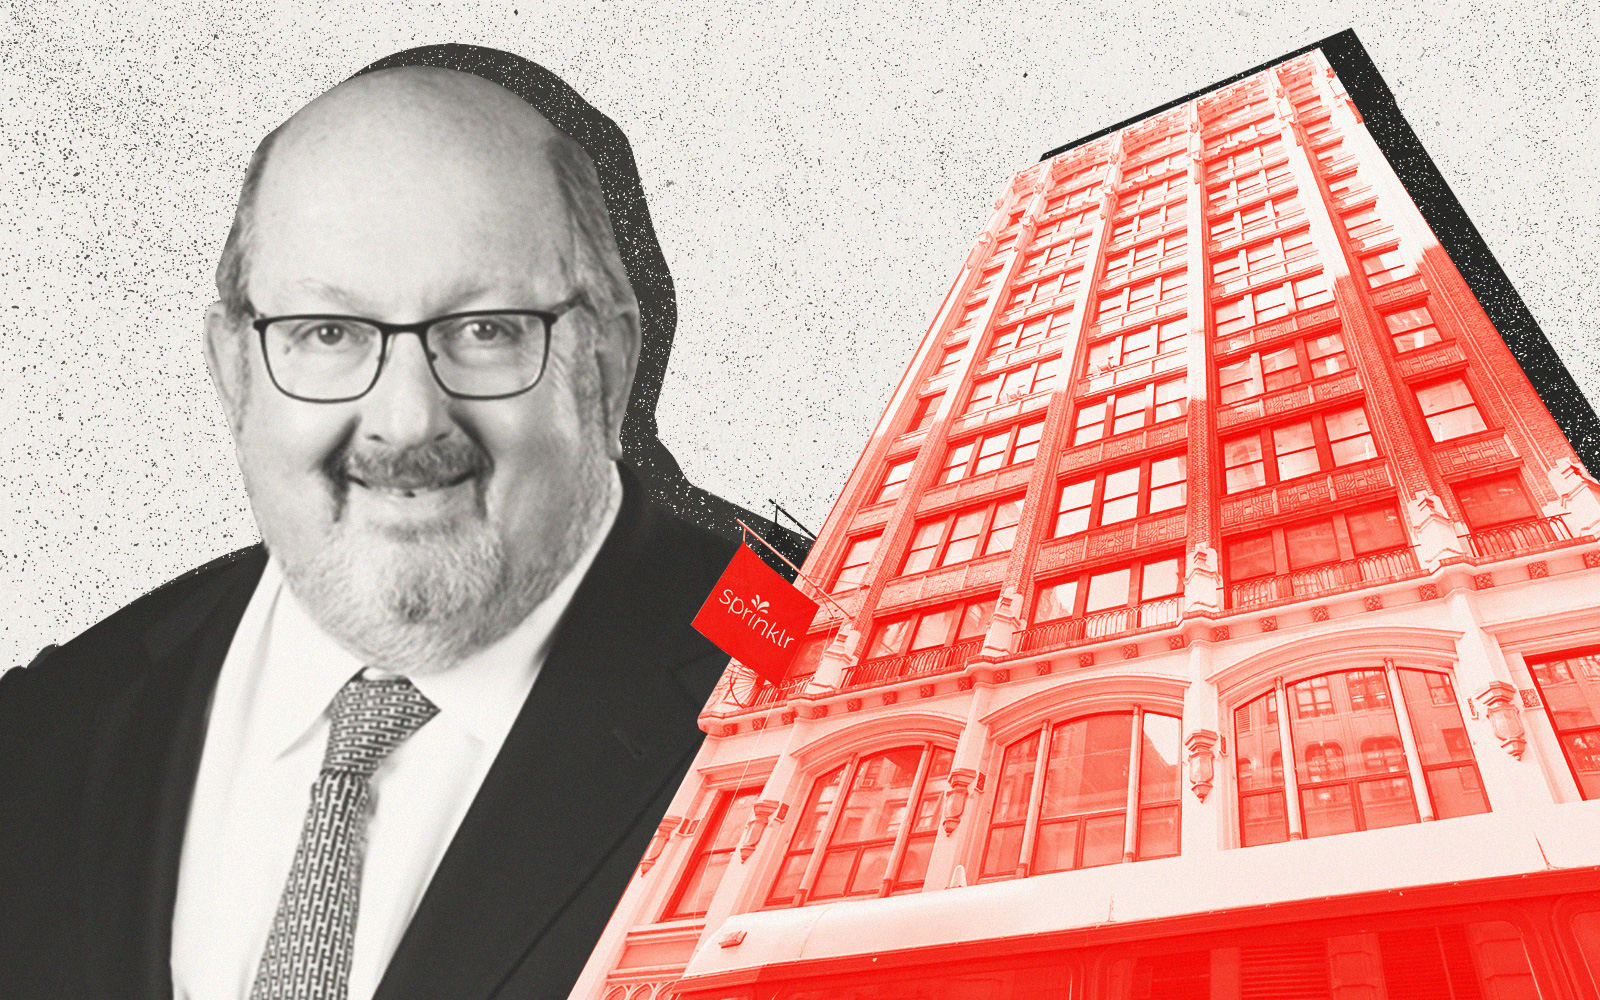 Sternlicht's LNR eyes auction for Midtown office facing foreclosure after $41M default